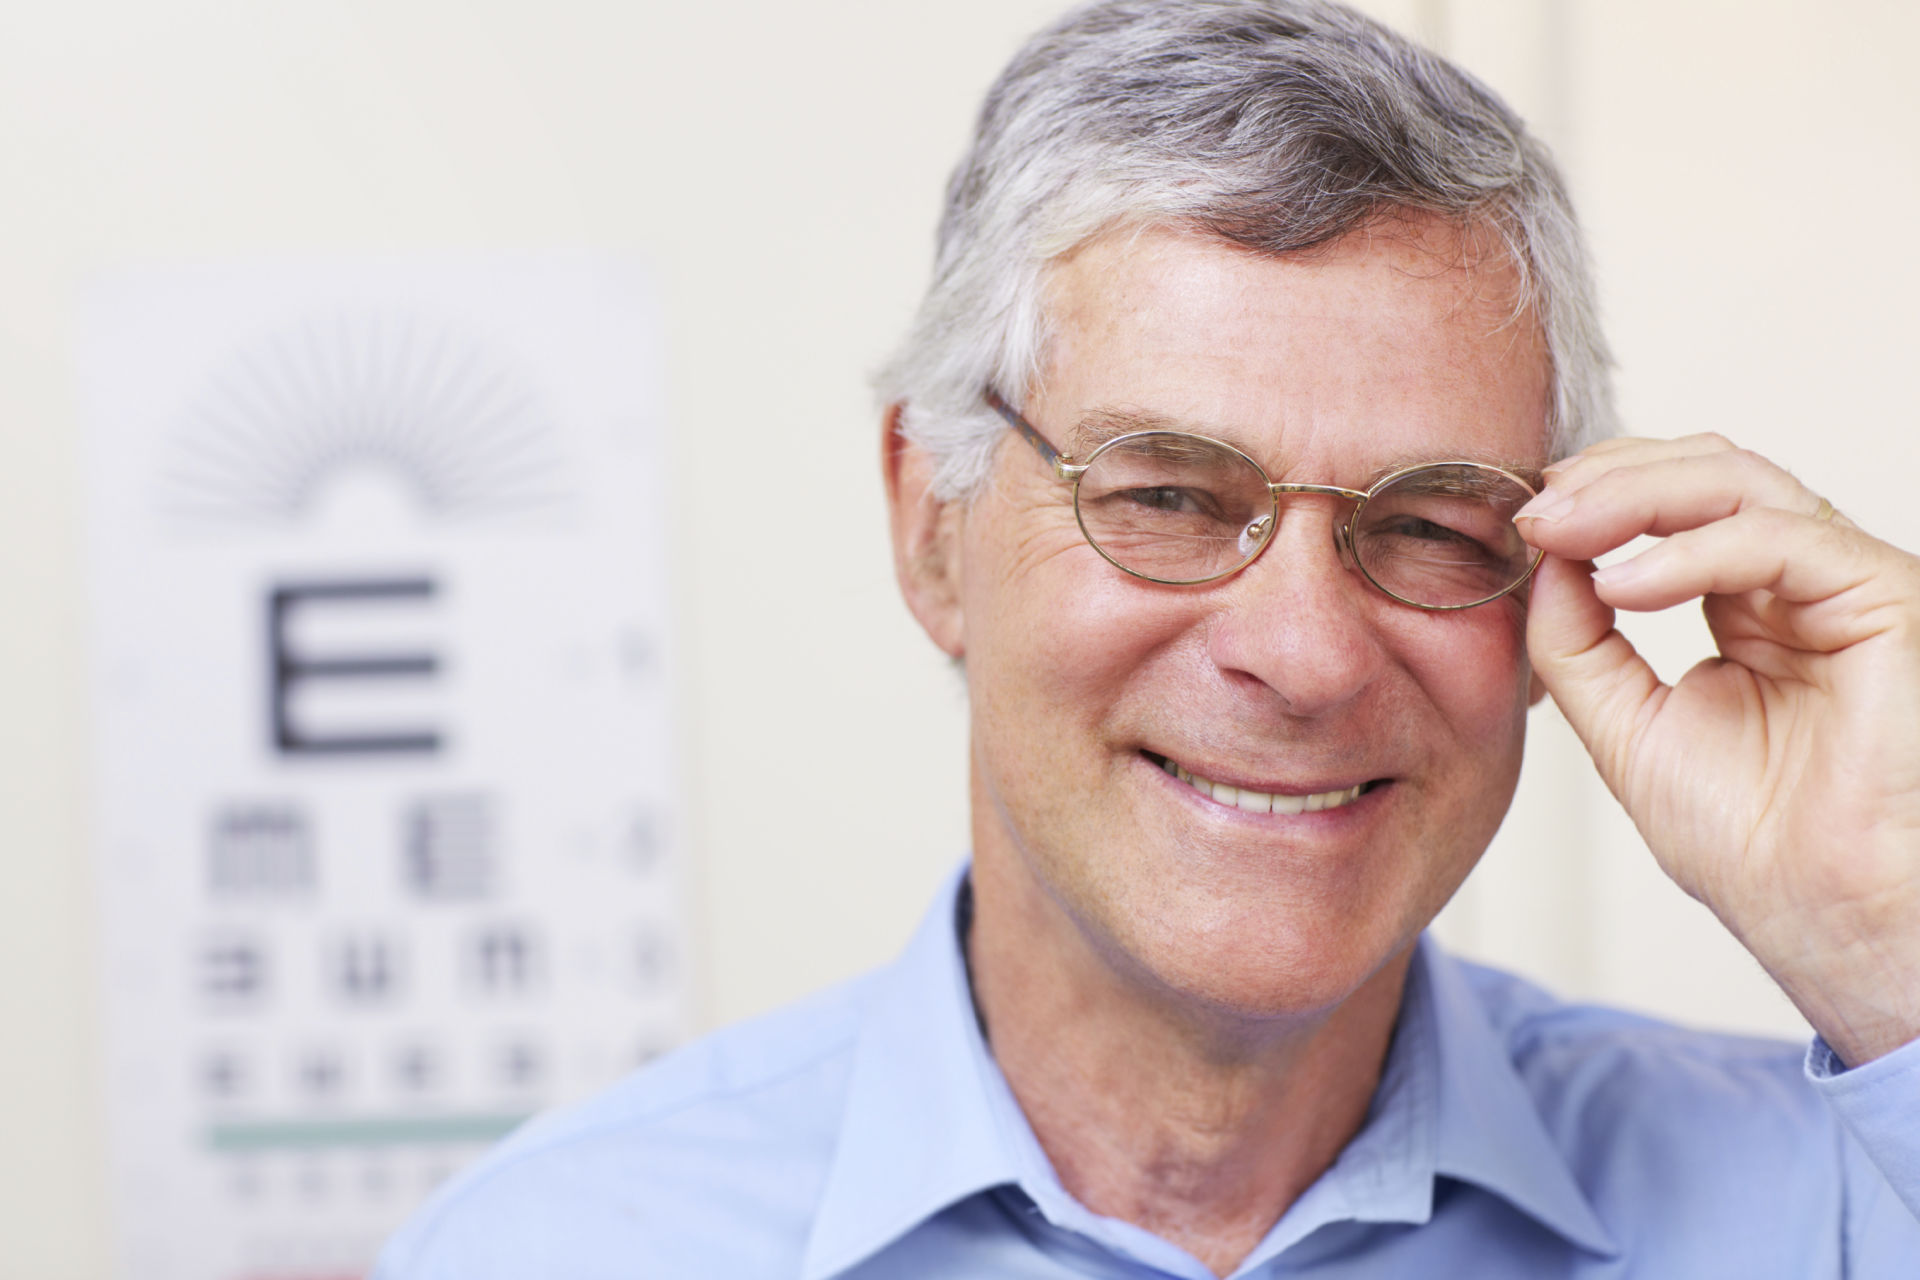 Debunking 3 Myths About Glaucoma & Uncovering the Truth